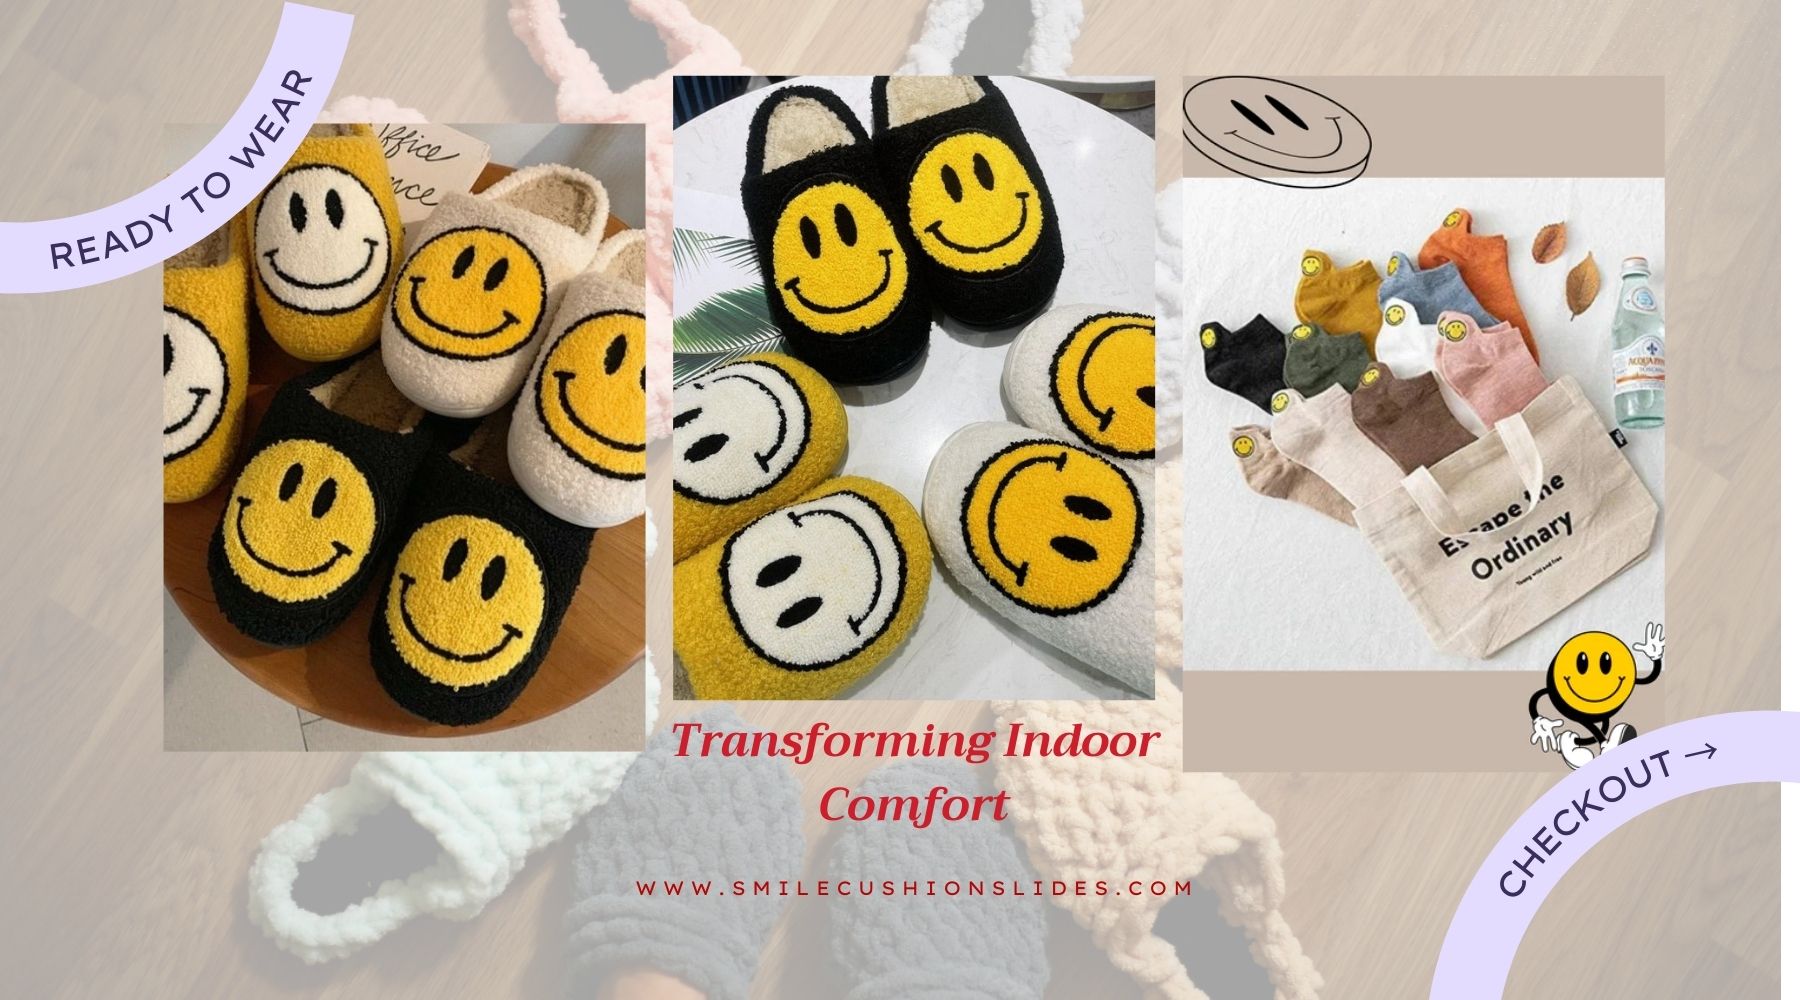 Transforming Indoor Comfort: How Smile Cushion Slides Are Redefining Relaxation at Home